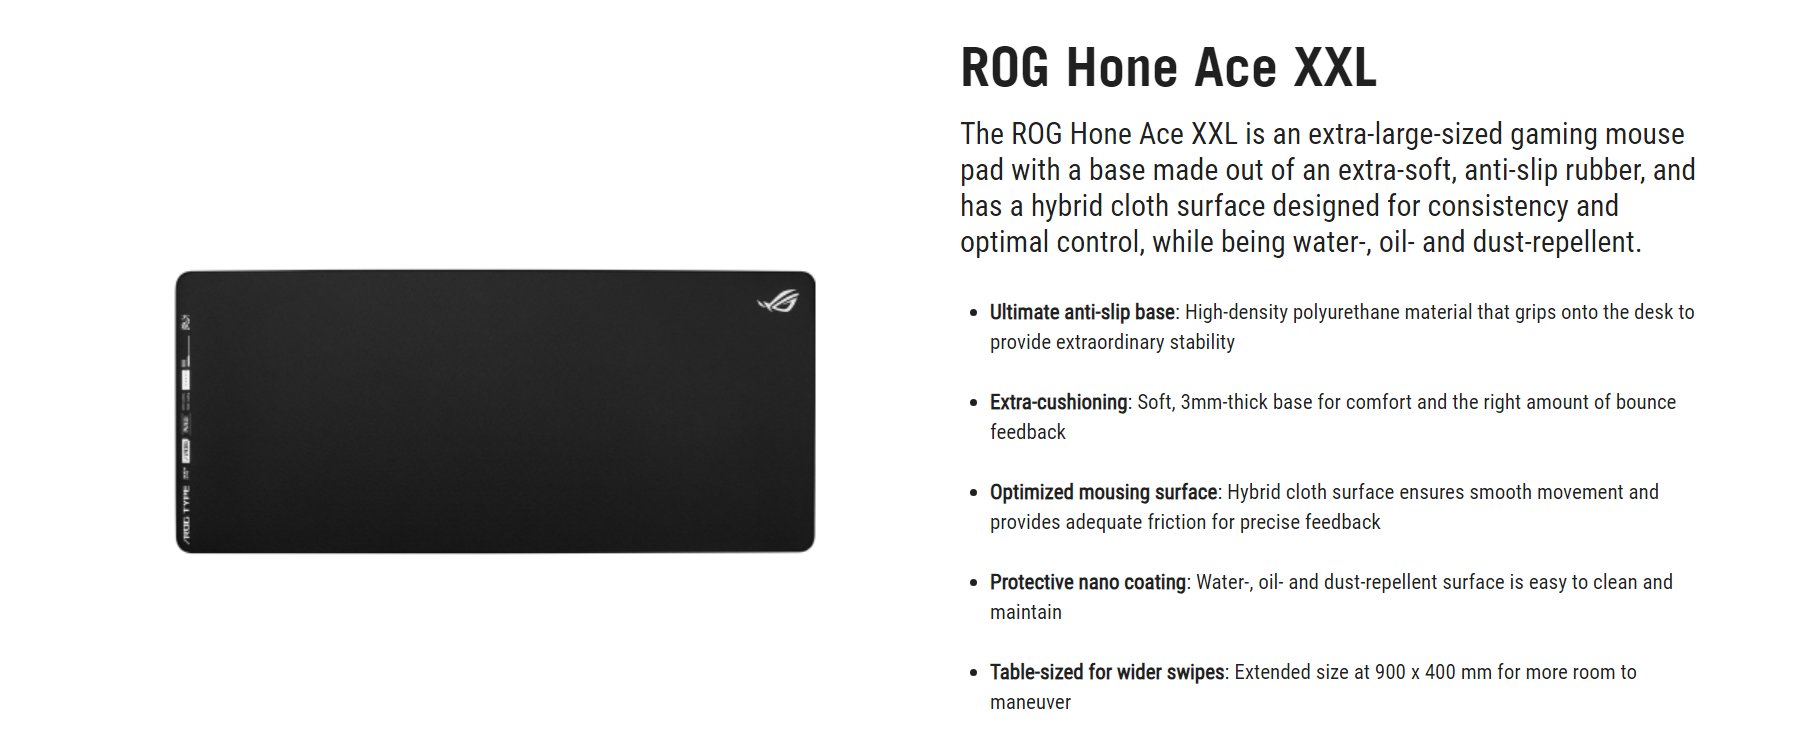 A large marketing image providing additional information about the product ASUS ROG Hone Ace XXL Gaming Mousepad - Additional alt info not provided